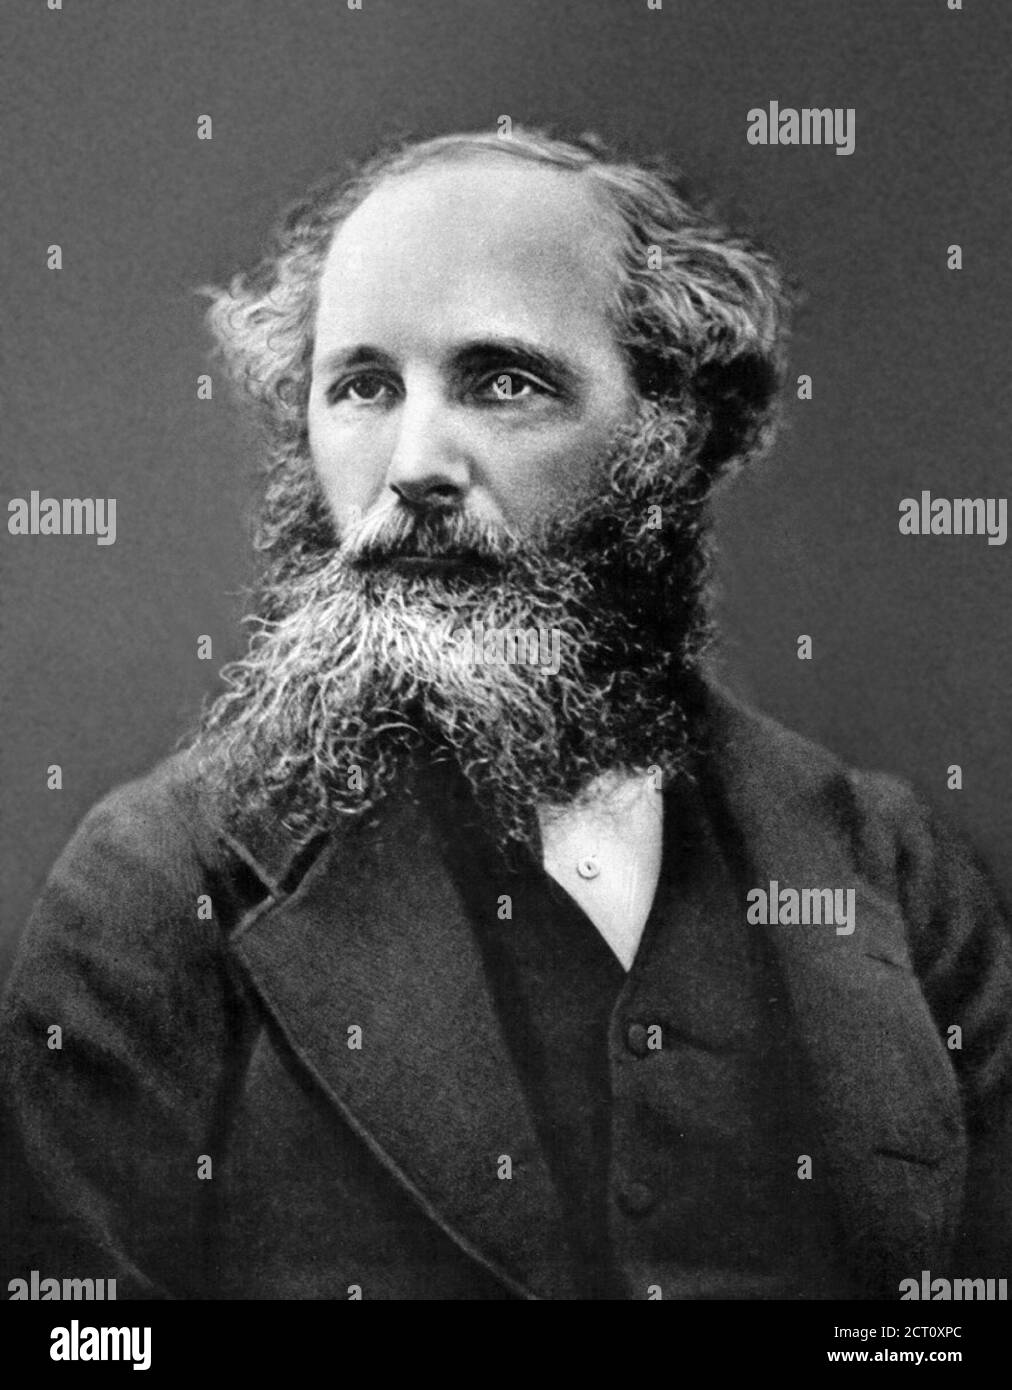 James Clerk Maxwell. Portrait of the Scottish scientiest, James Clerk Maxwell (1831-1879) whose most notable achievement was to formulate the classical theory of electromagnetic radiation. Stock Photo